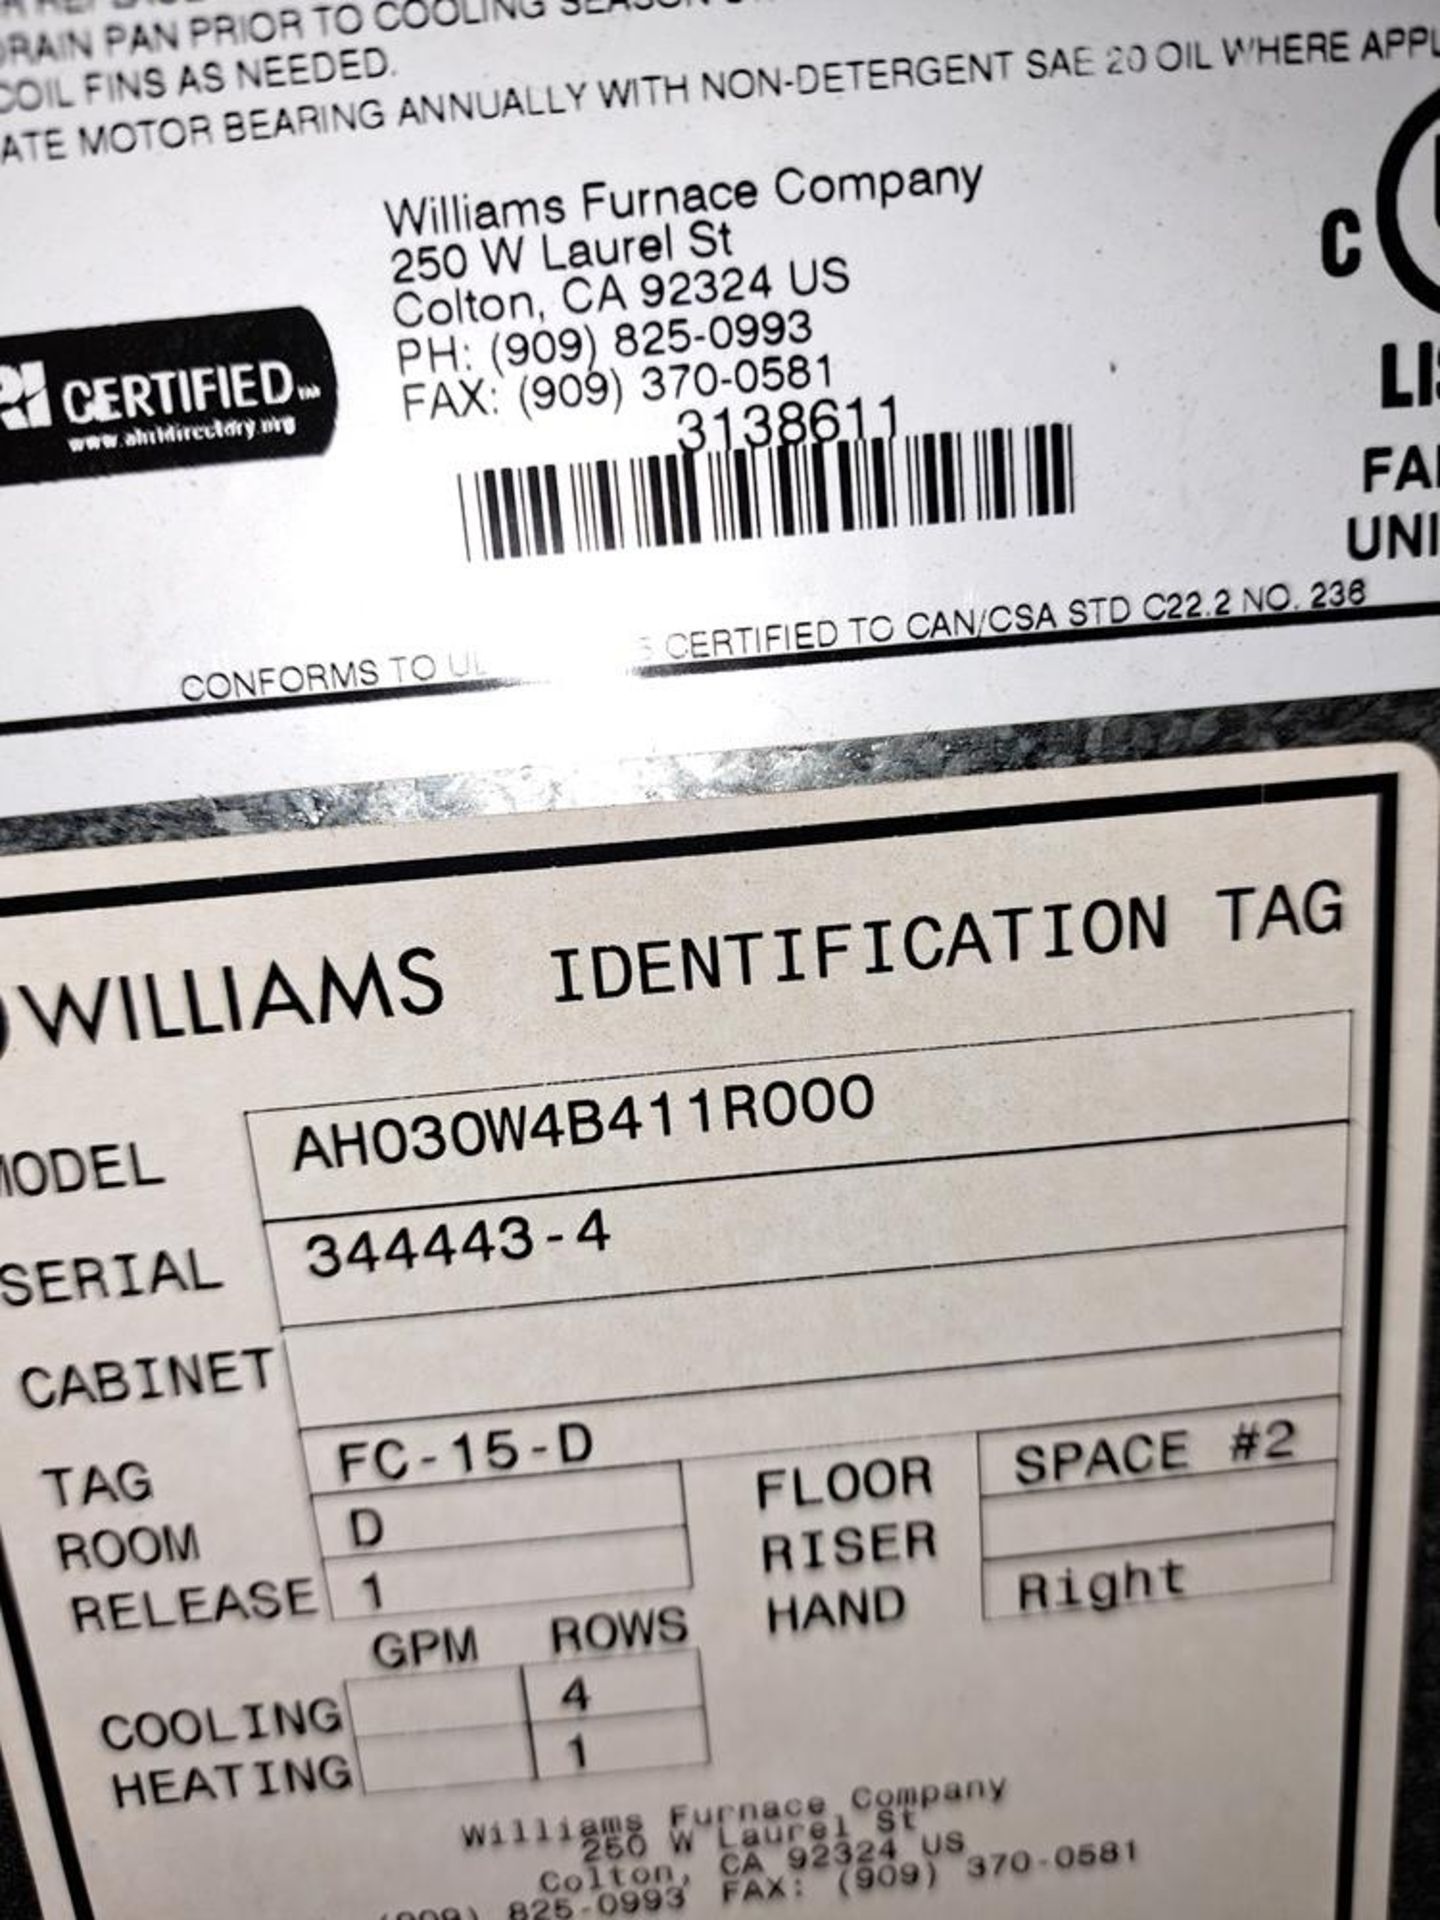 Williams Mdl. #AH030WB11R000 Fan Coil, Ser. #344443-4, 120 volts (New/Unused In Crate)spanphoto - Image 2 of 3